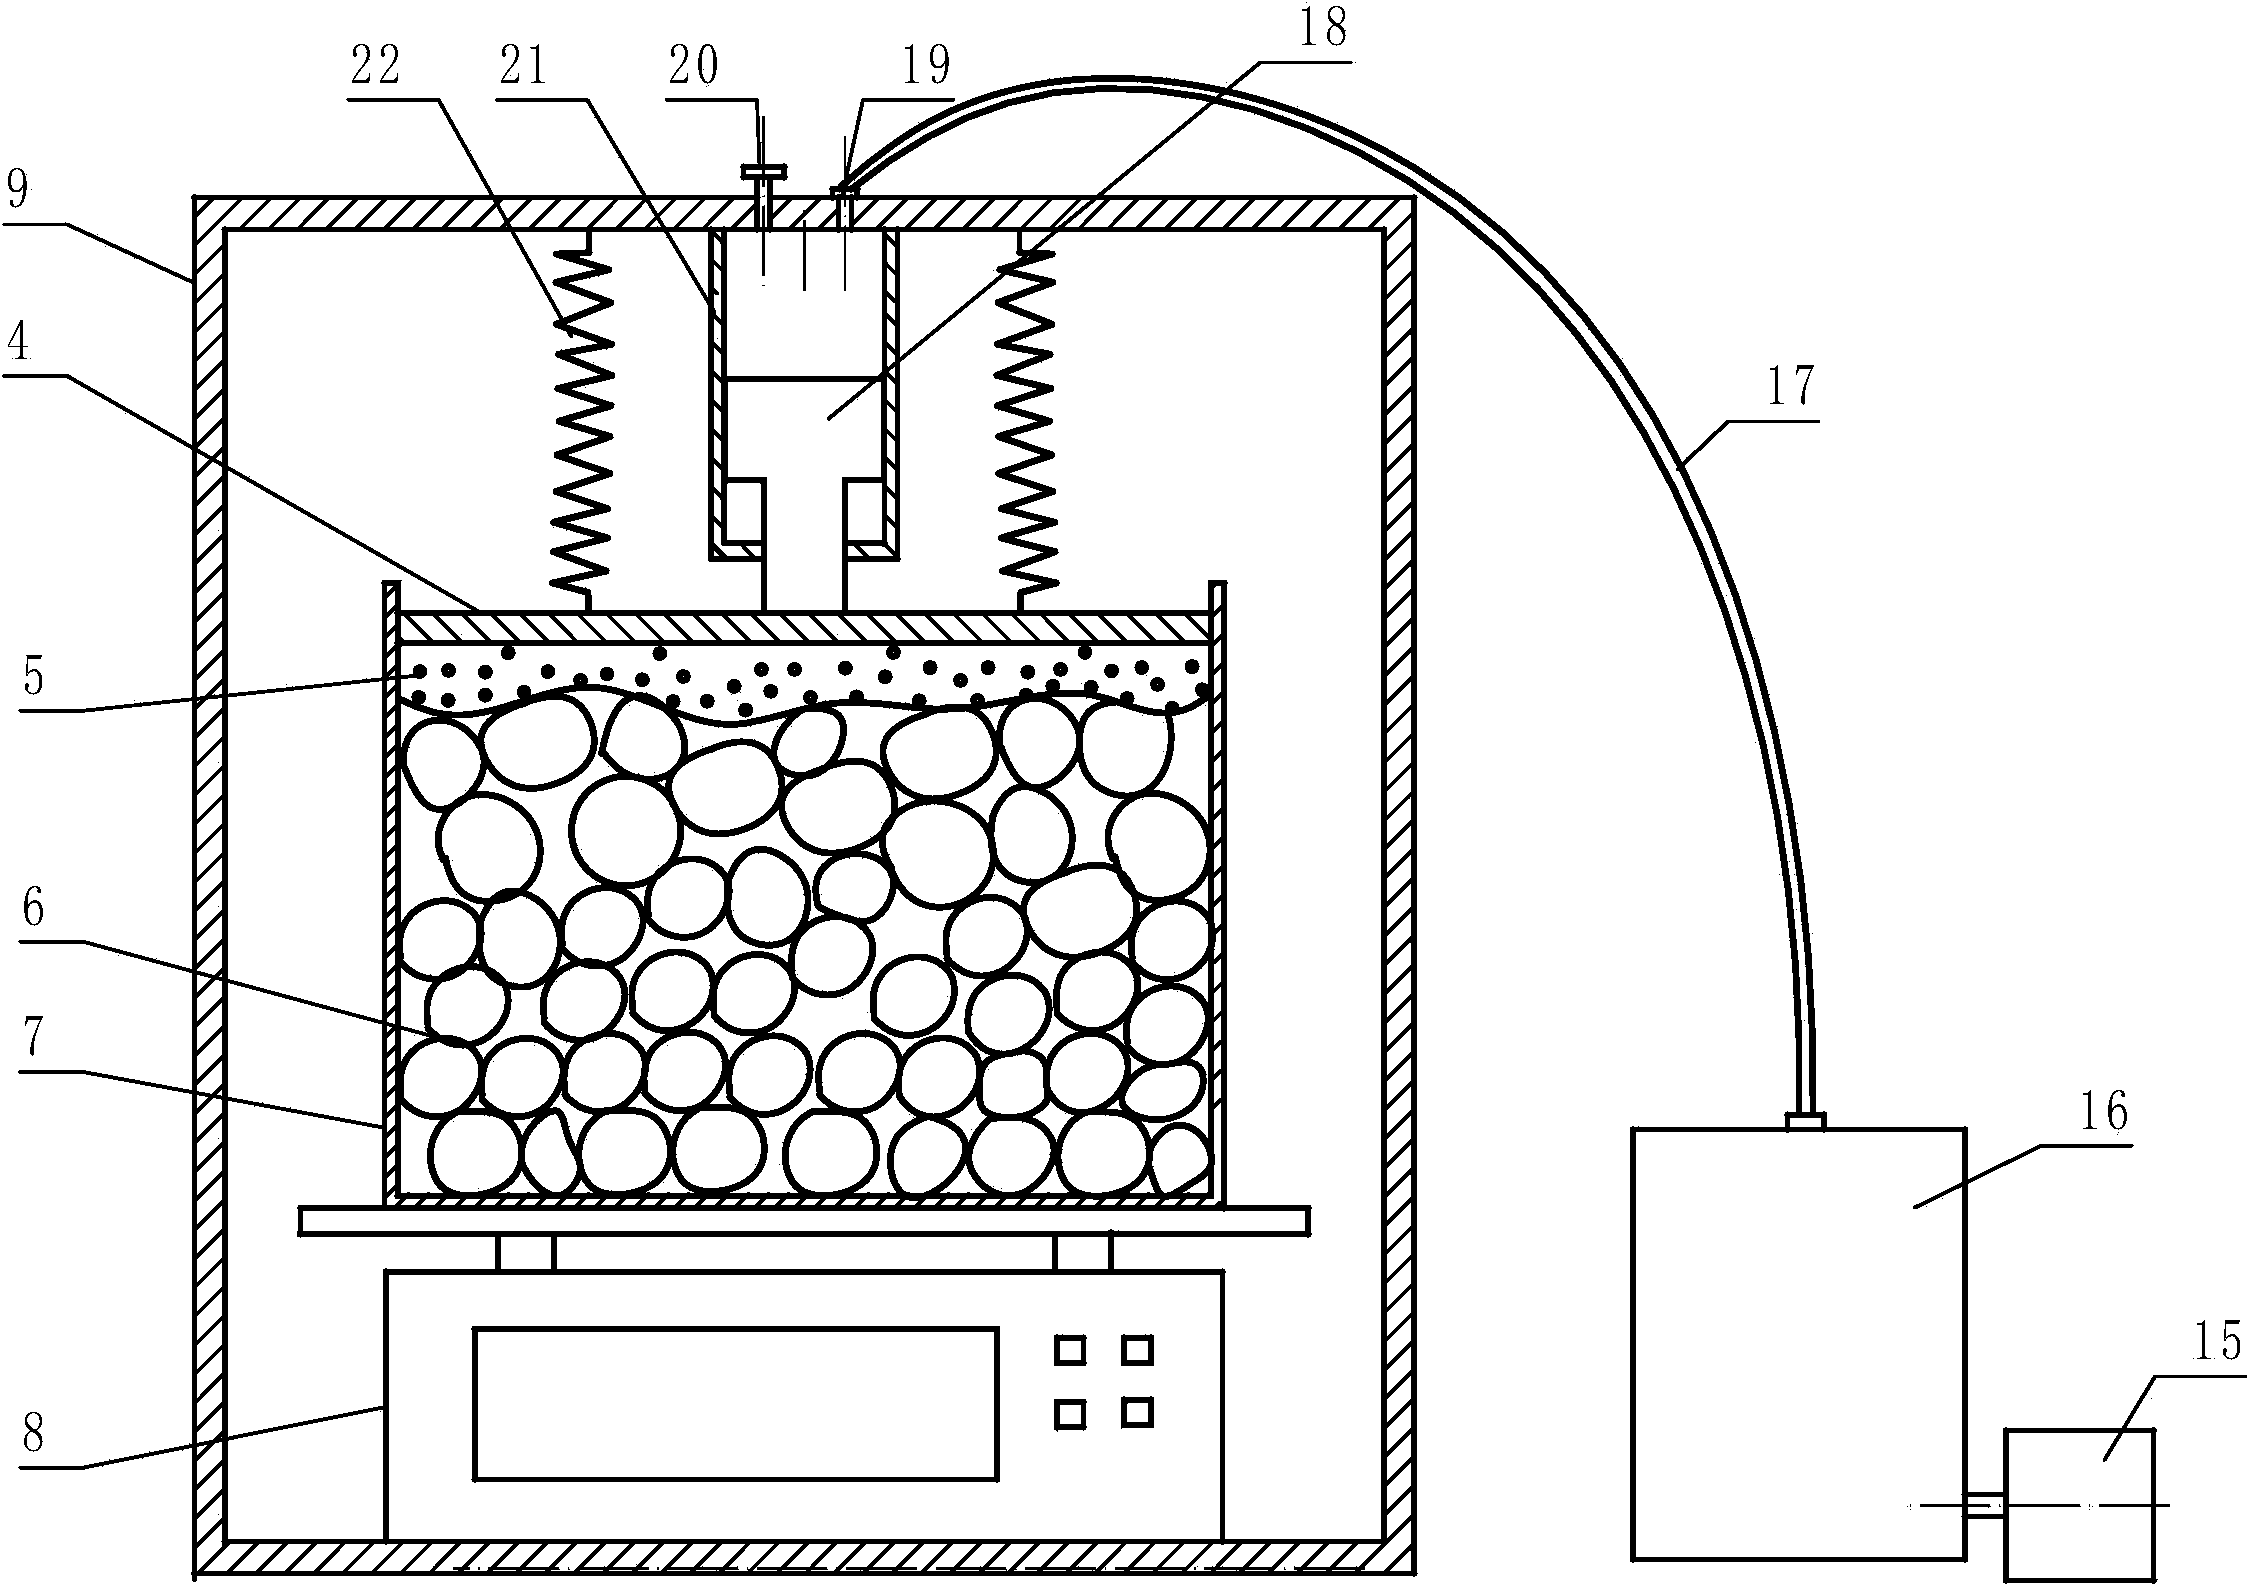 Device for measuring pressure resistance of processed tomatoes